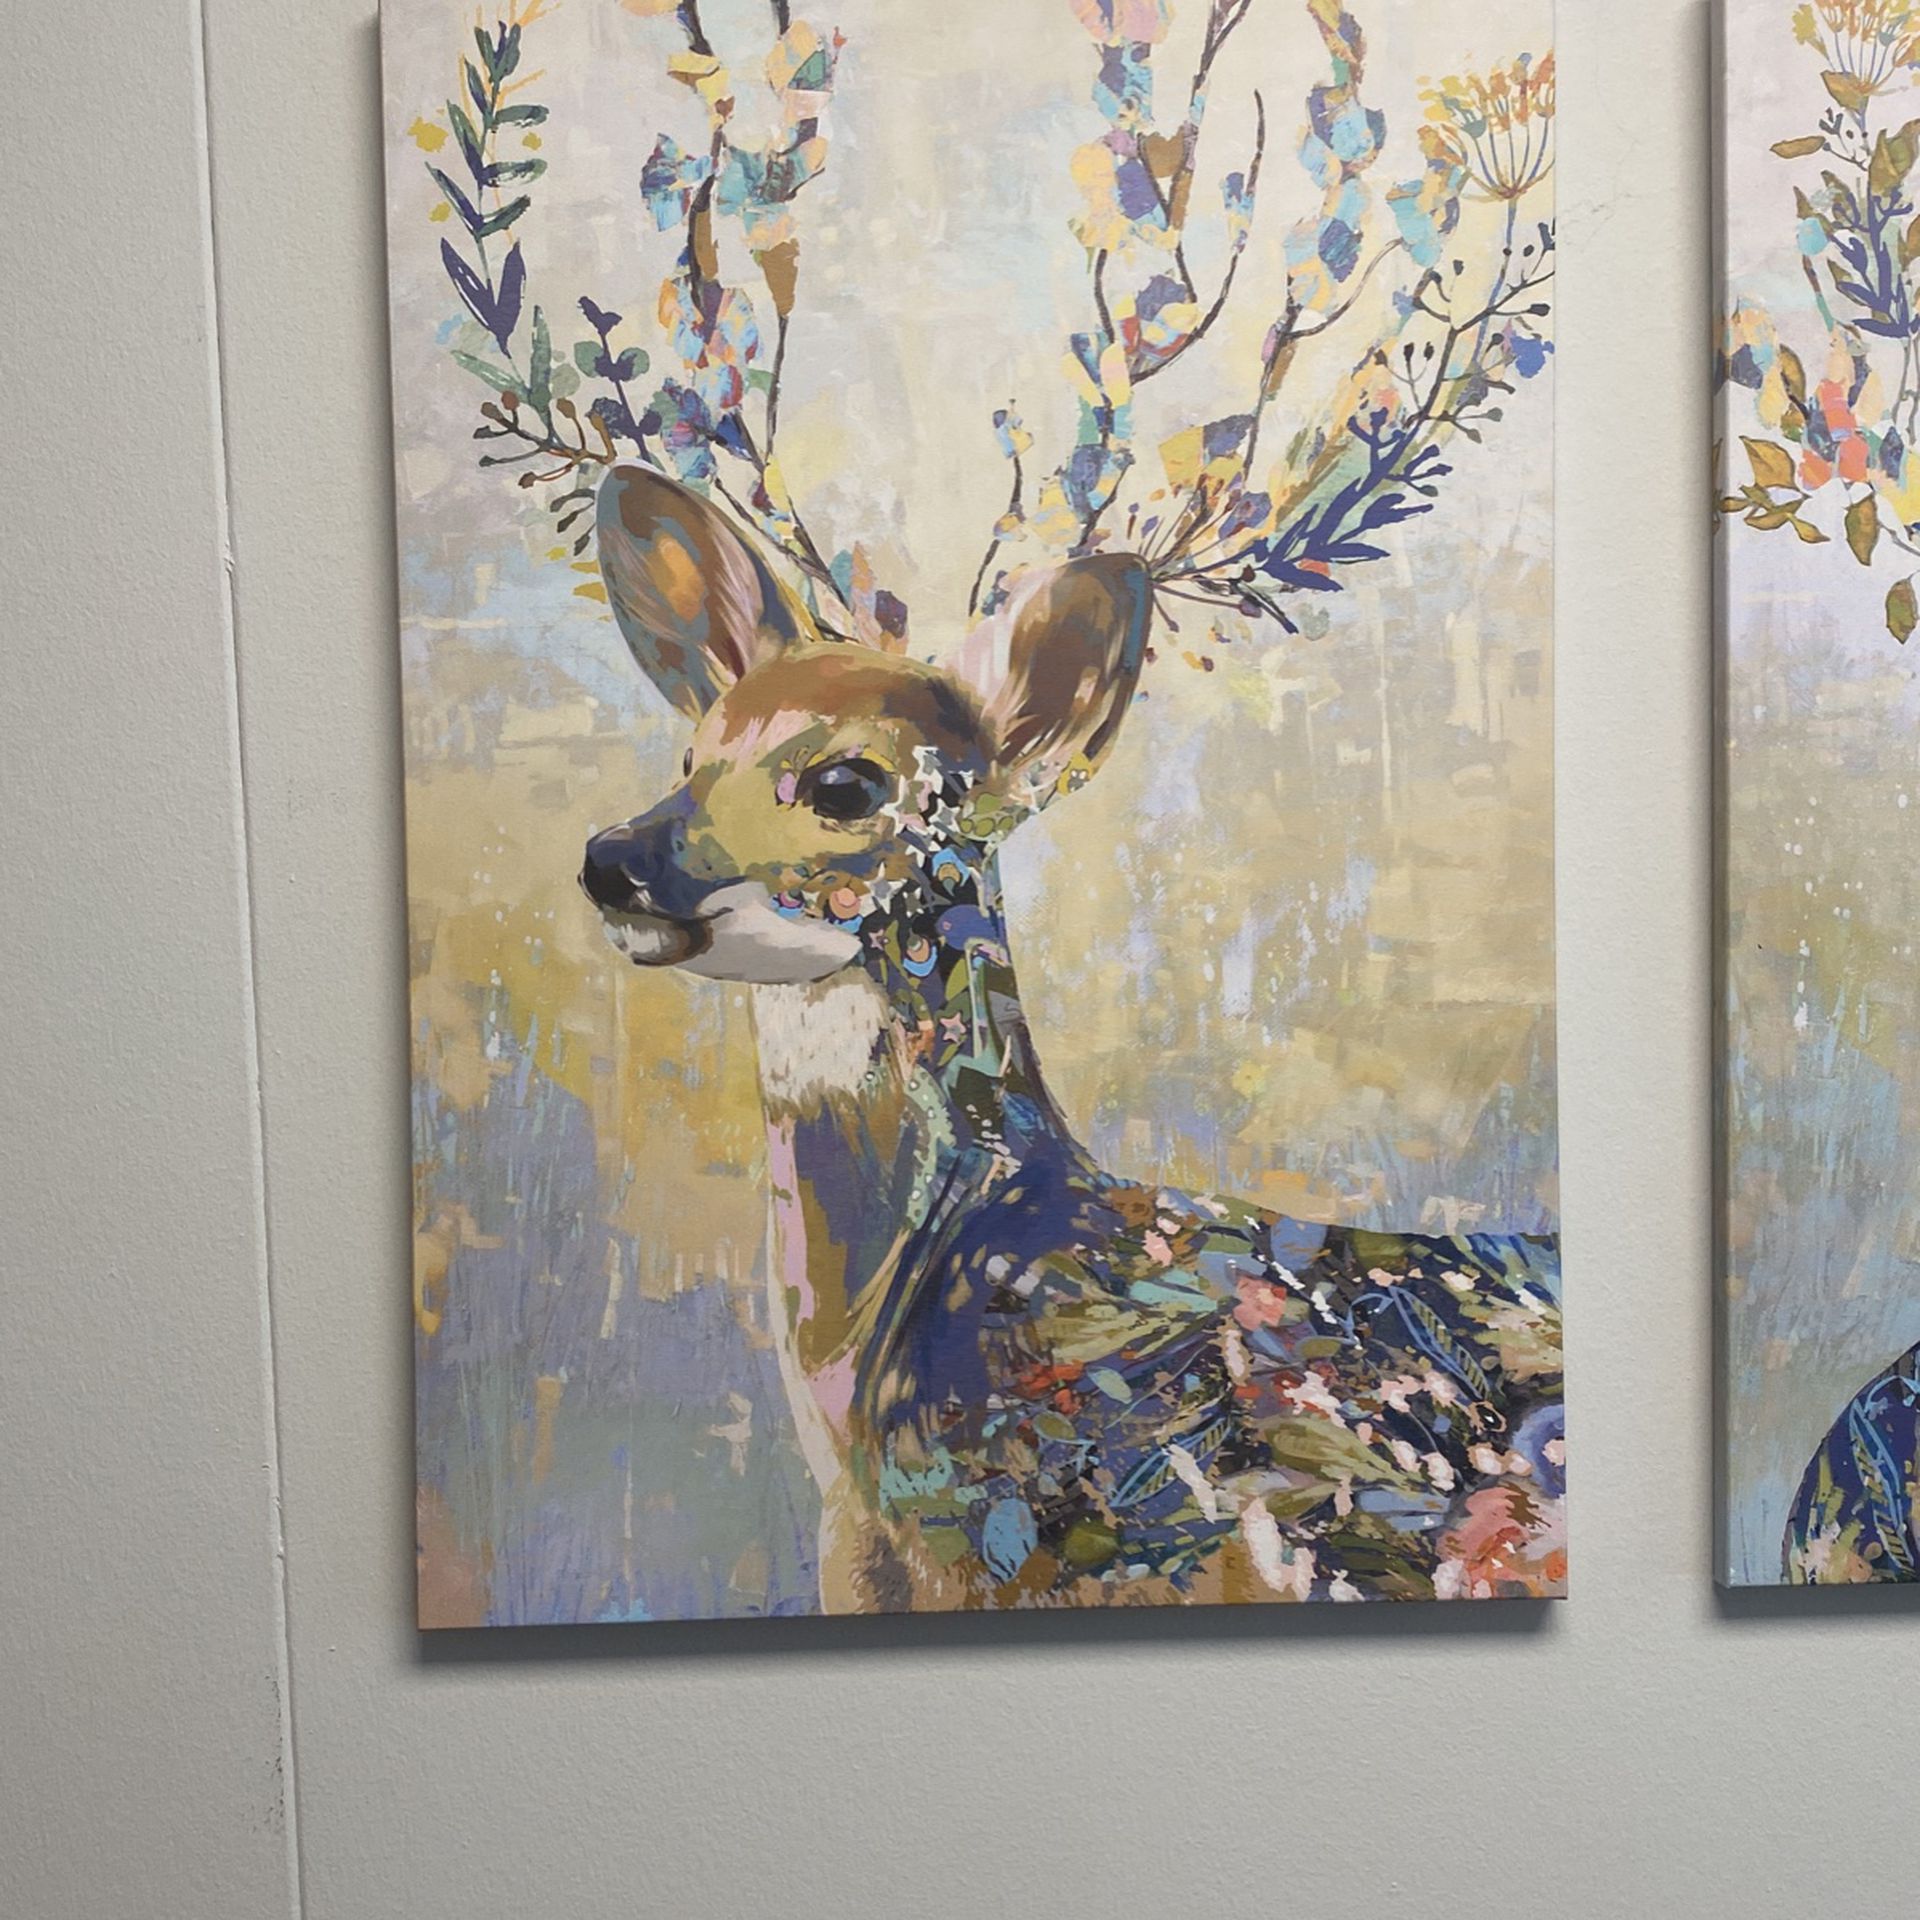 Deer Painting $50 For Both